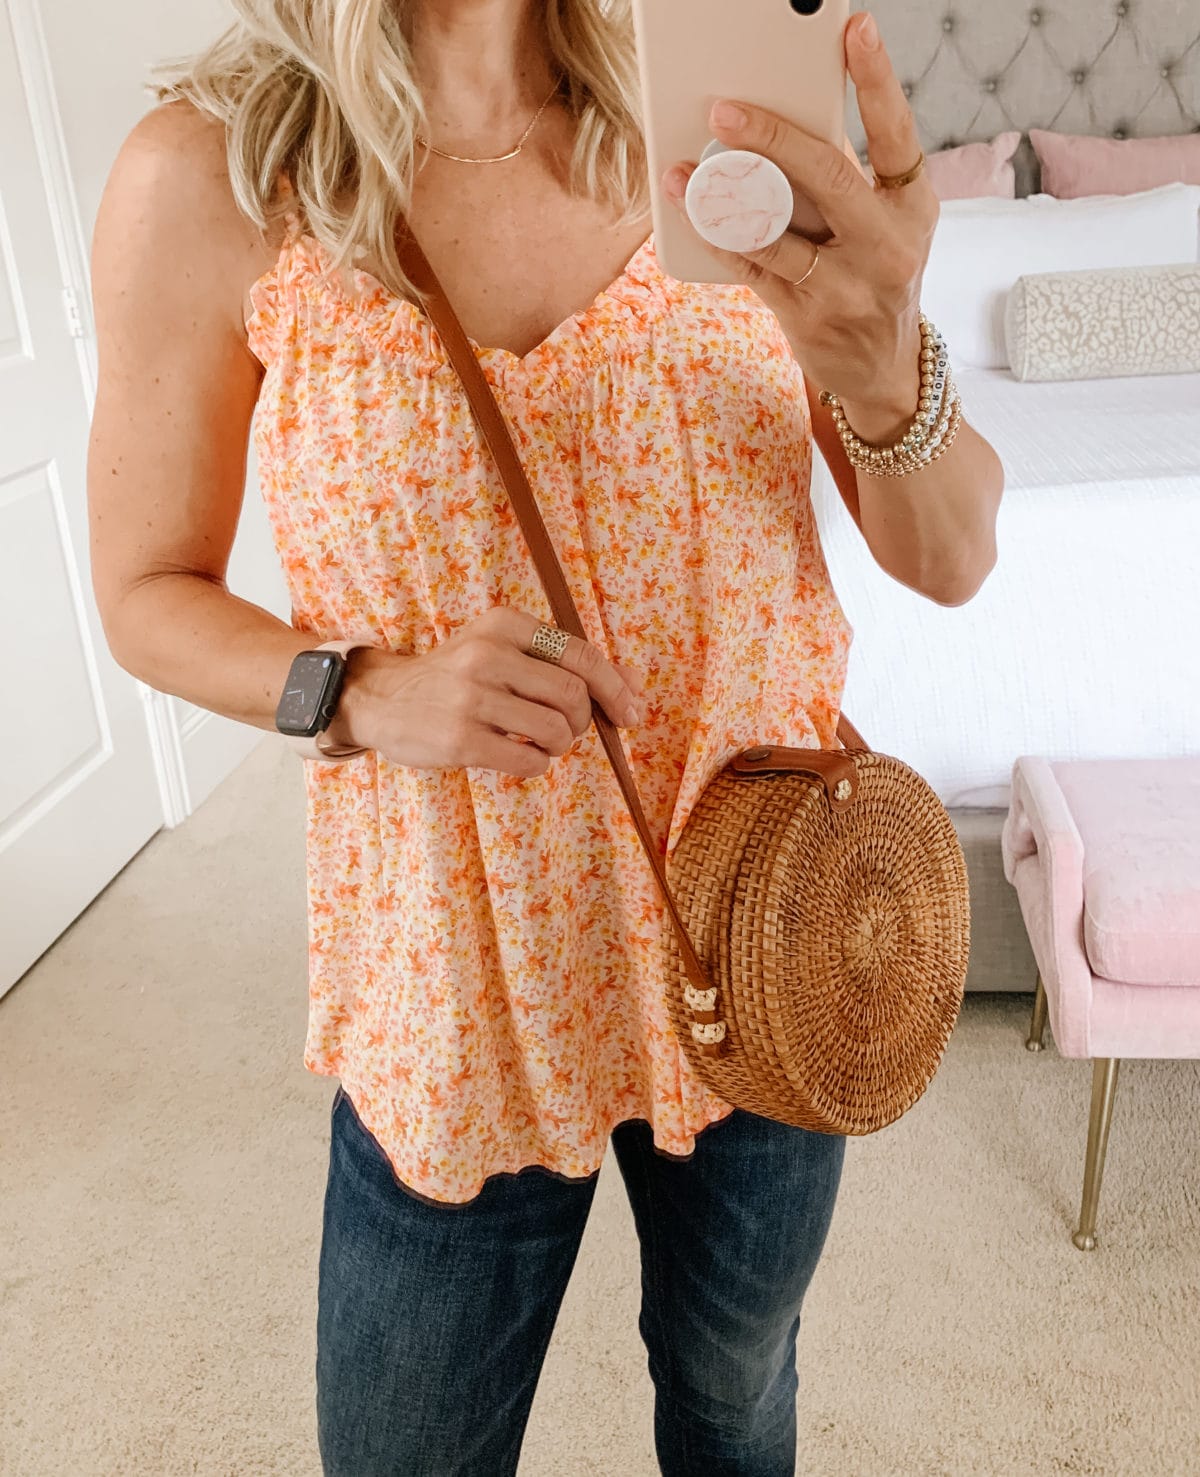 Old Navy Fashion, Floral Cami, Jeans, Wedges, Crossbody 